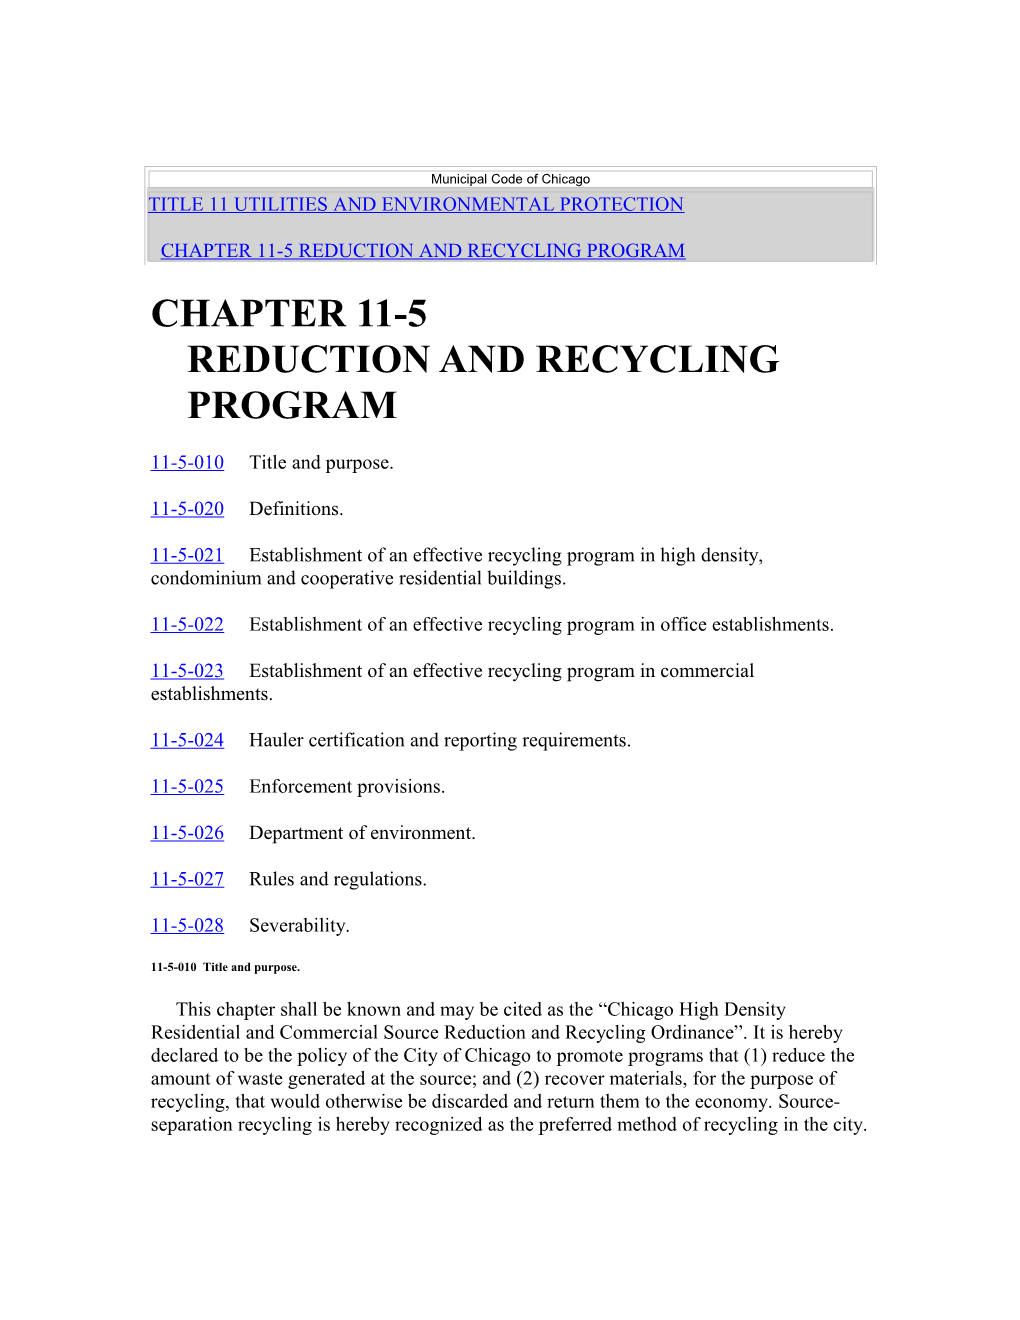 Chapter 11-5 Reduction and Recycling Program